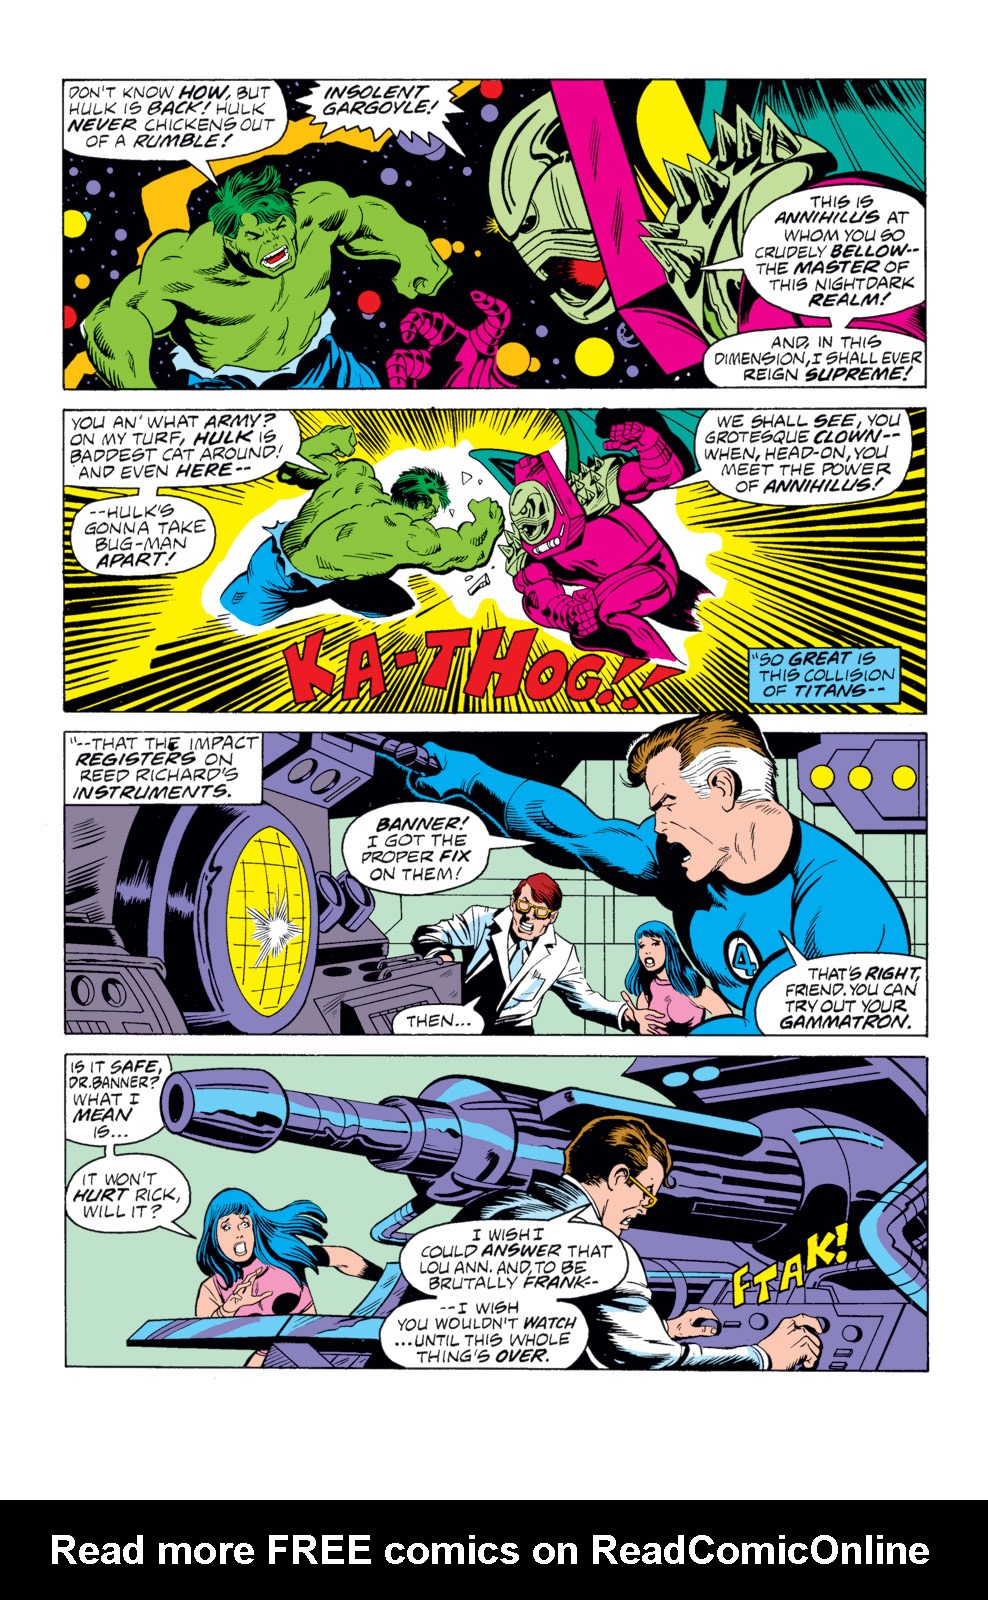 What If? (1977) issue 12 - Rick Jones had become the Hulk - Page 26